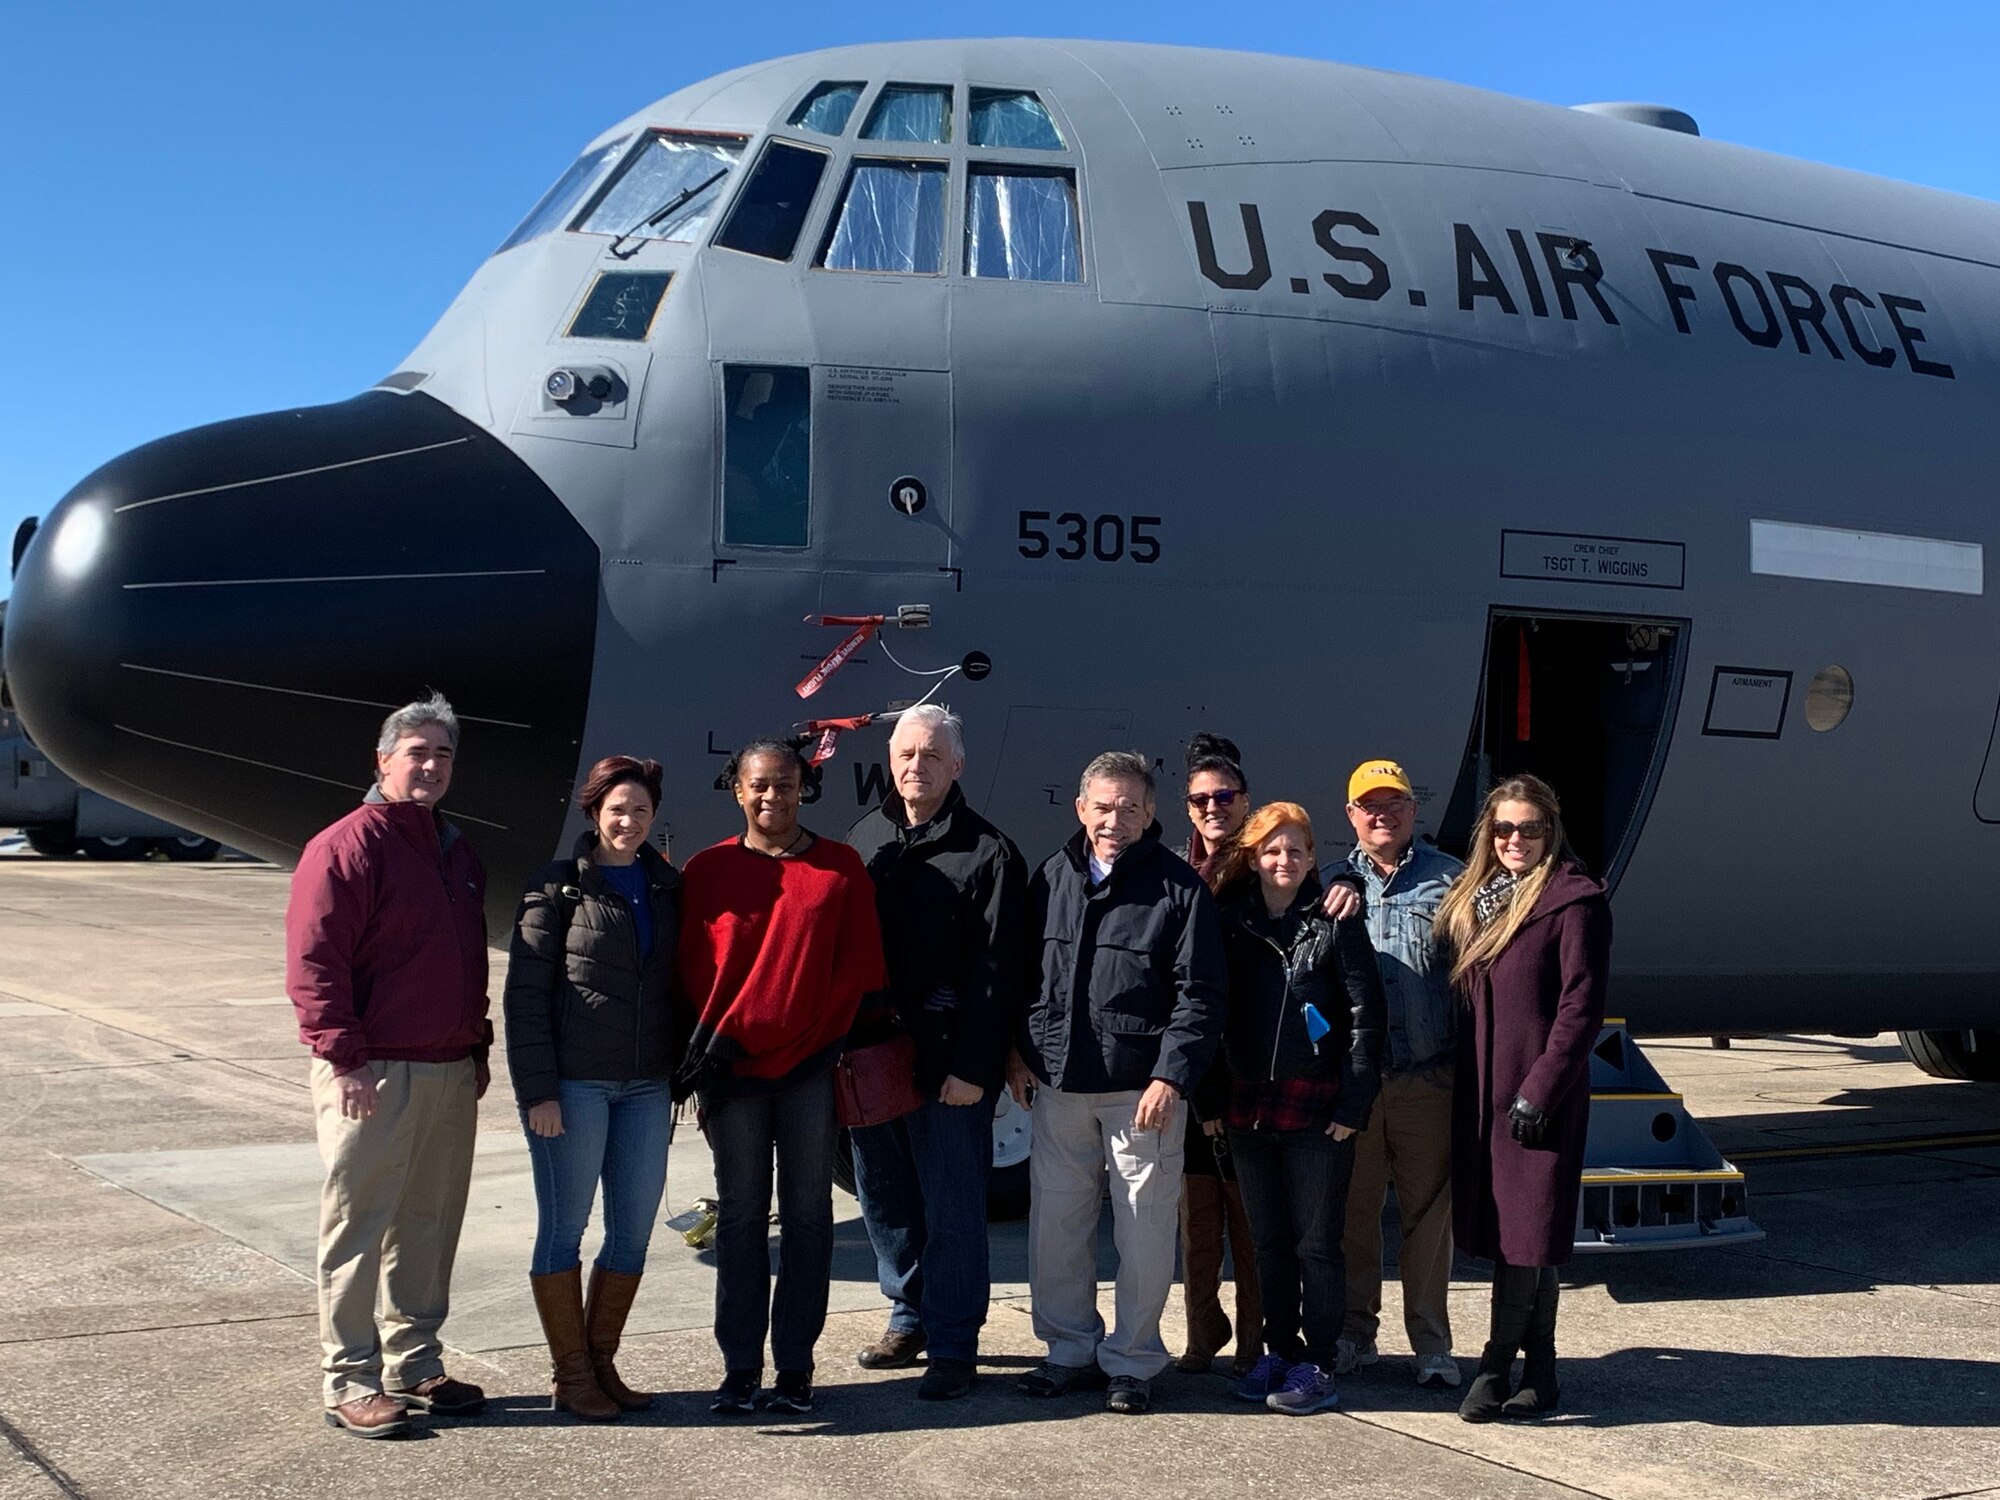 Civilian employers pose for a photo in front of a WC-130J Super Hercules aircraft, during Employer Appreciation Day, Nov. 2, at Keesler Air Force Base, Miss. The event serves to educate employers on the value of their Reserve Citizen Airmen’s time away from their civilian workplaces and is an opportunity for them to see the 403rd Wing mission firsthand. (U.S. Air Force photo by Tech. Sgt. Christopher Carranza)